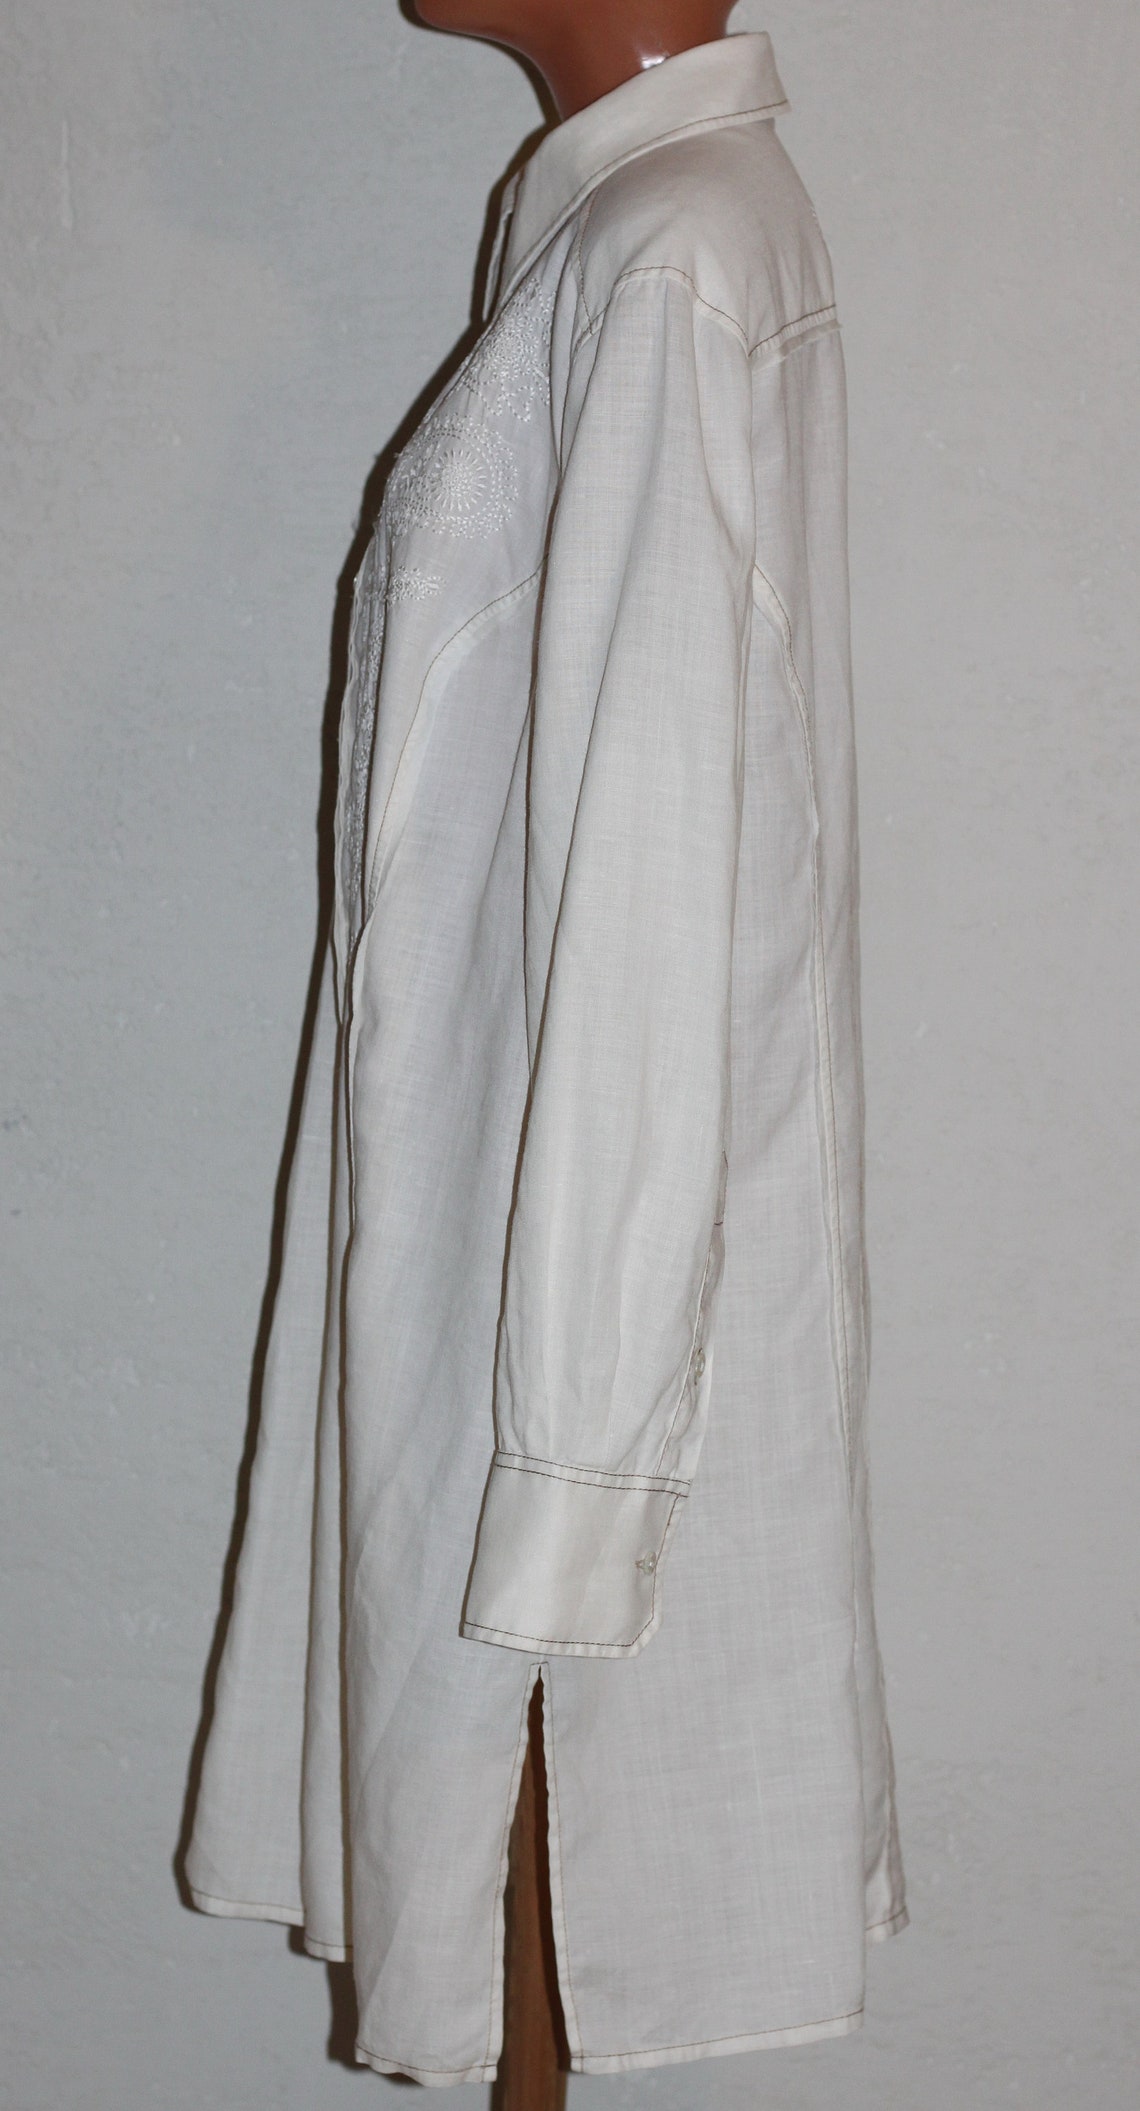 Luisa Cerano White Linen Embroidered Shirtdress Size US16 - Etsy